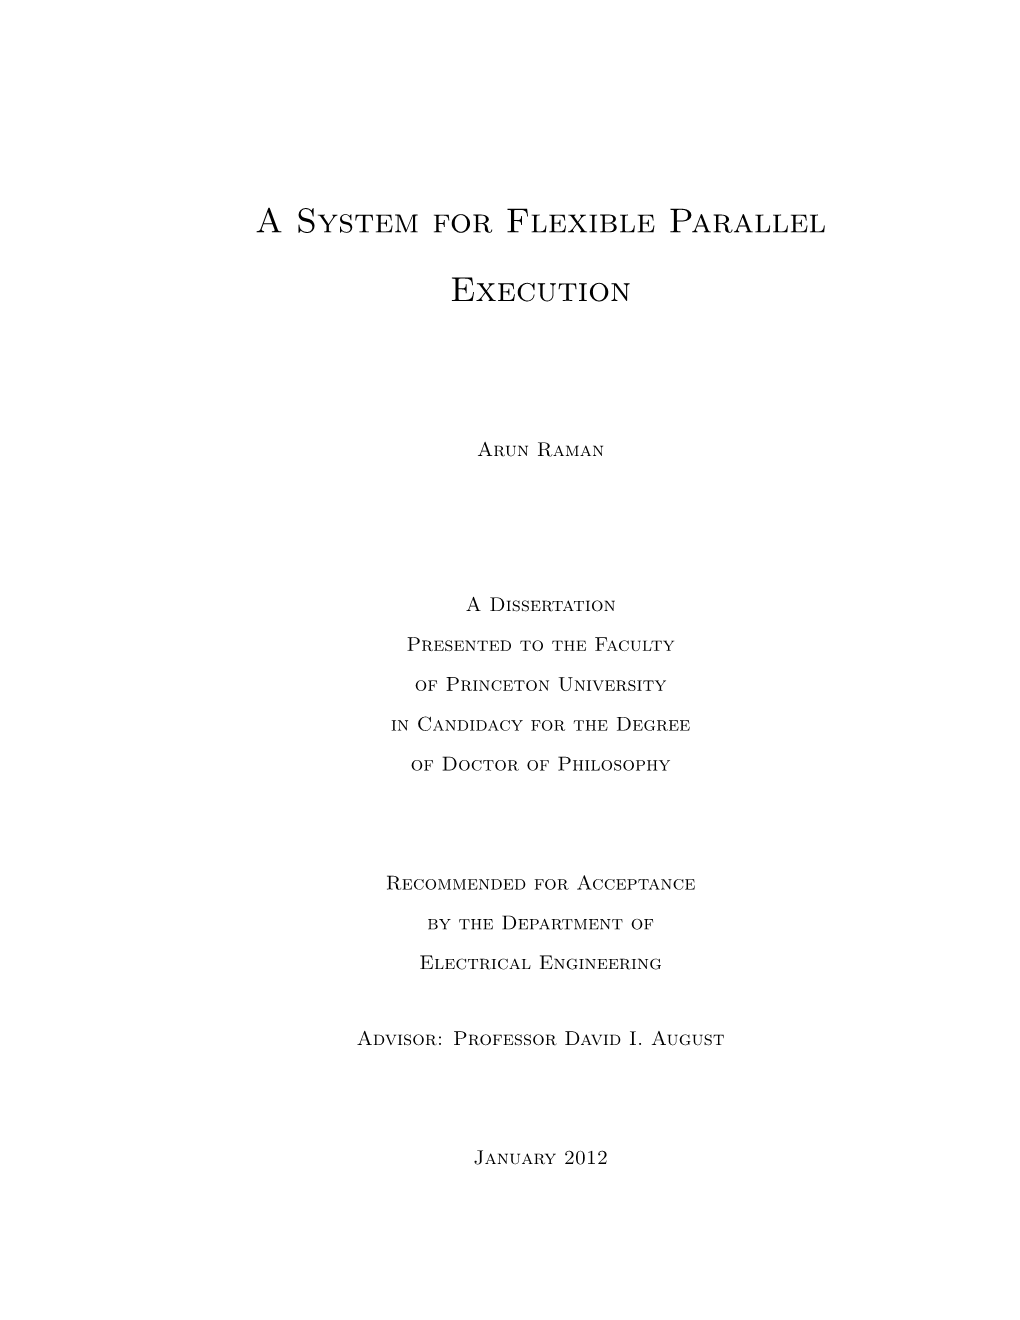 A System for Flexible Parallel Execution